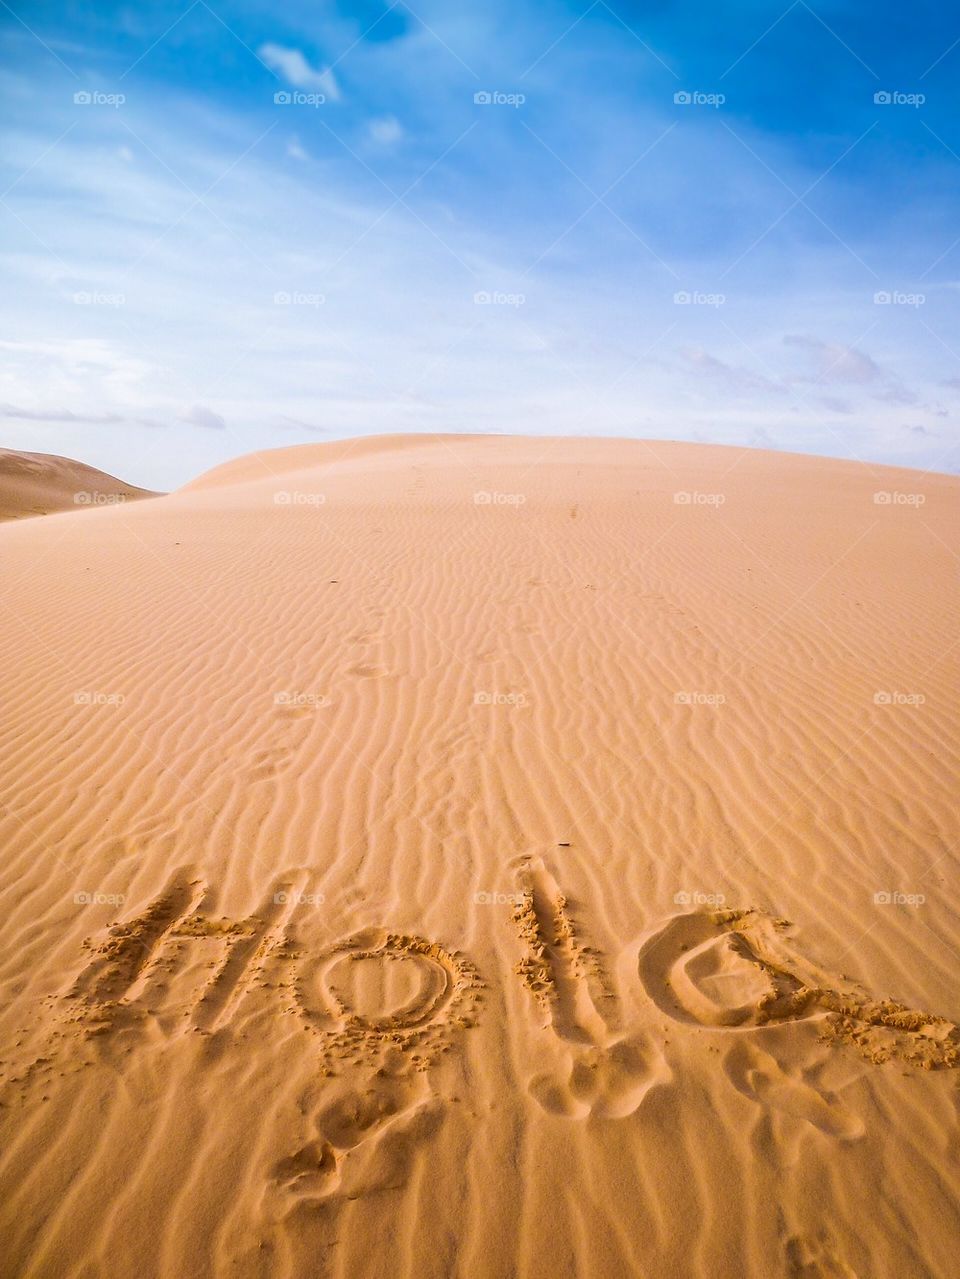 Greetings in Spanish written on sand. Hola.